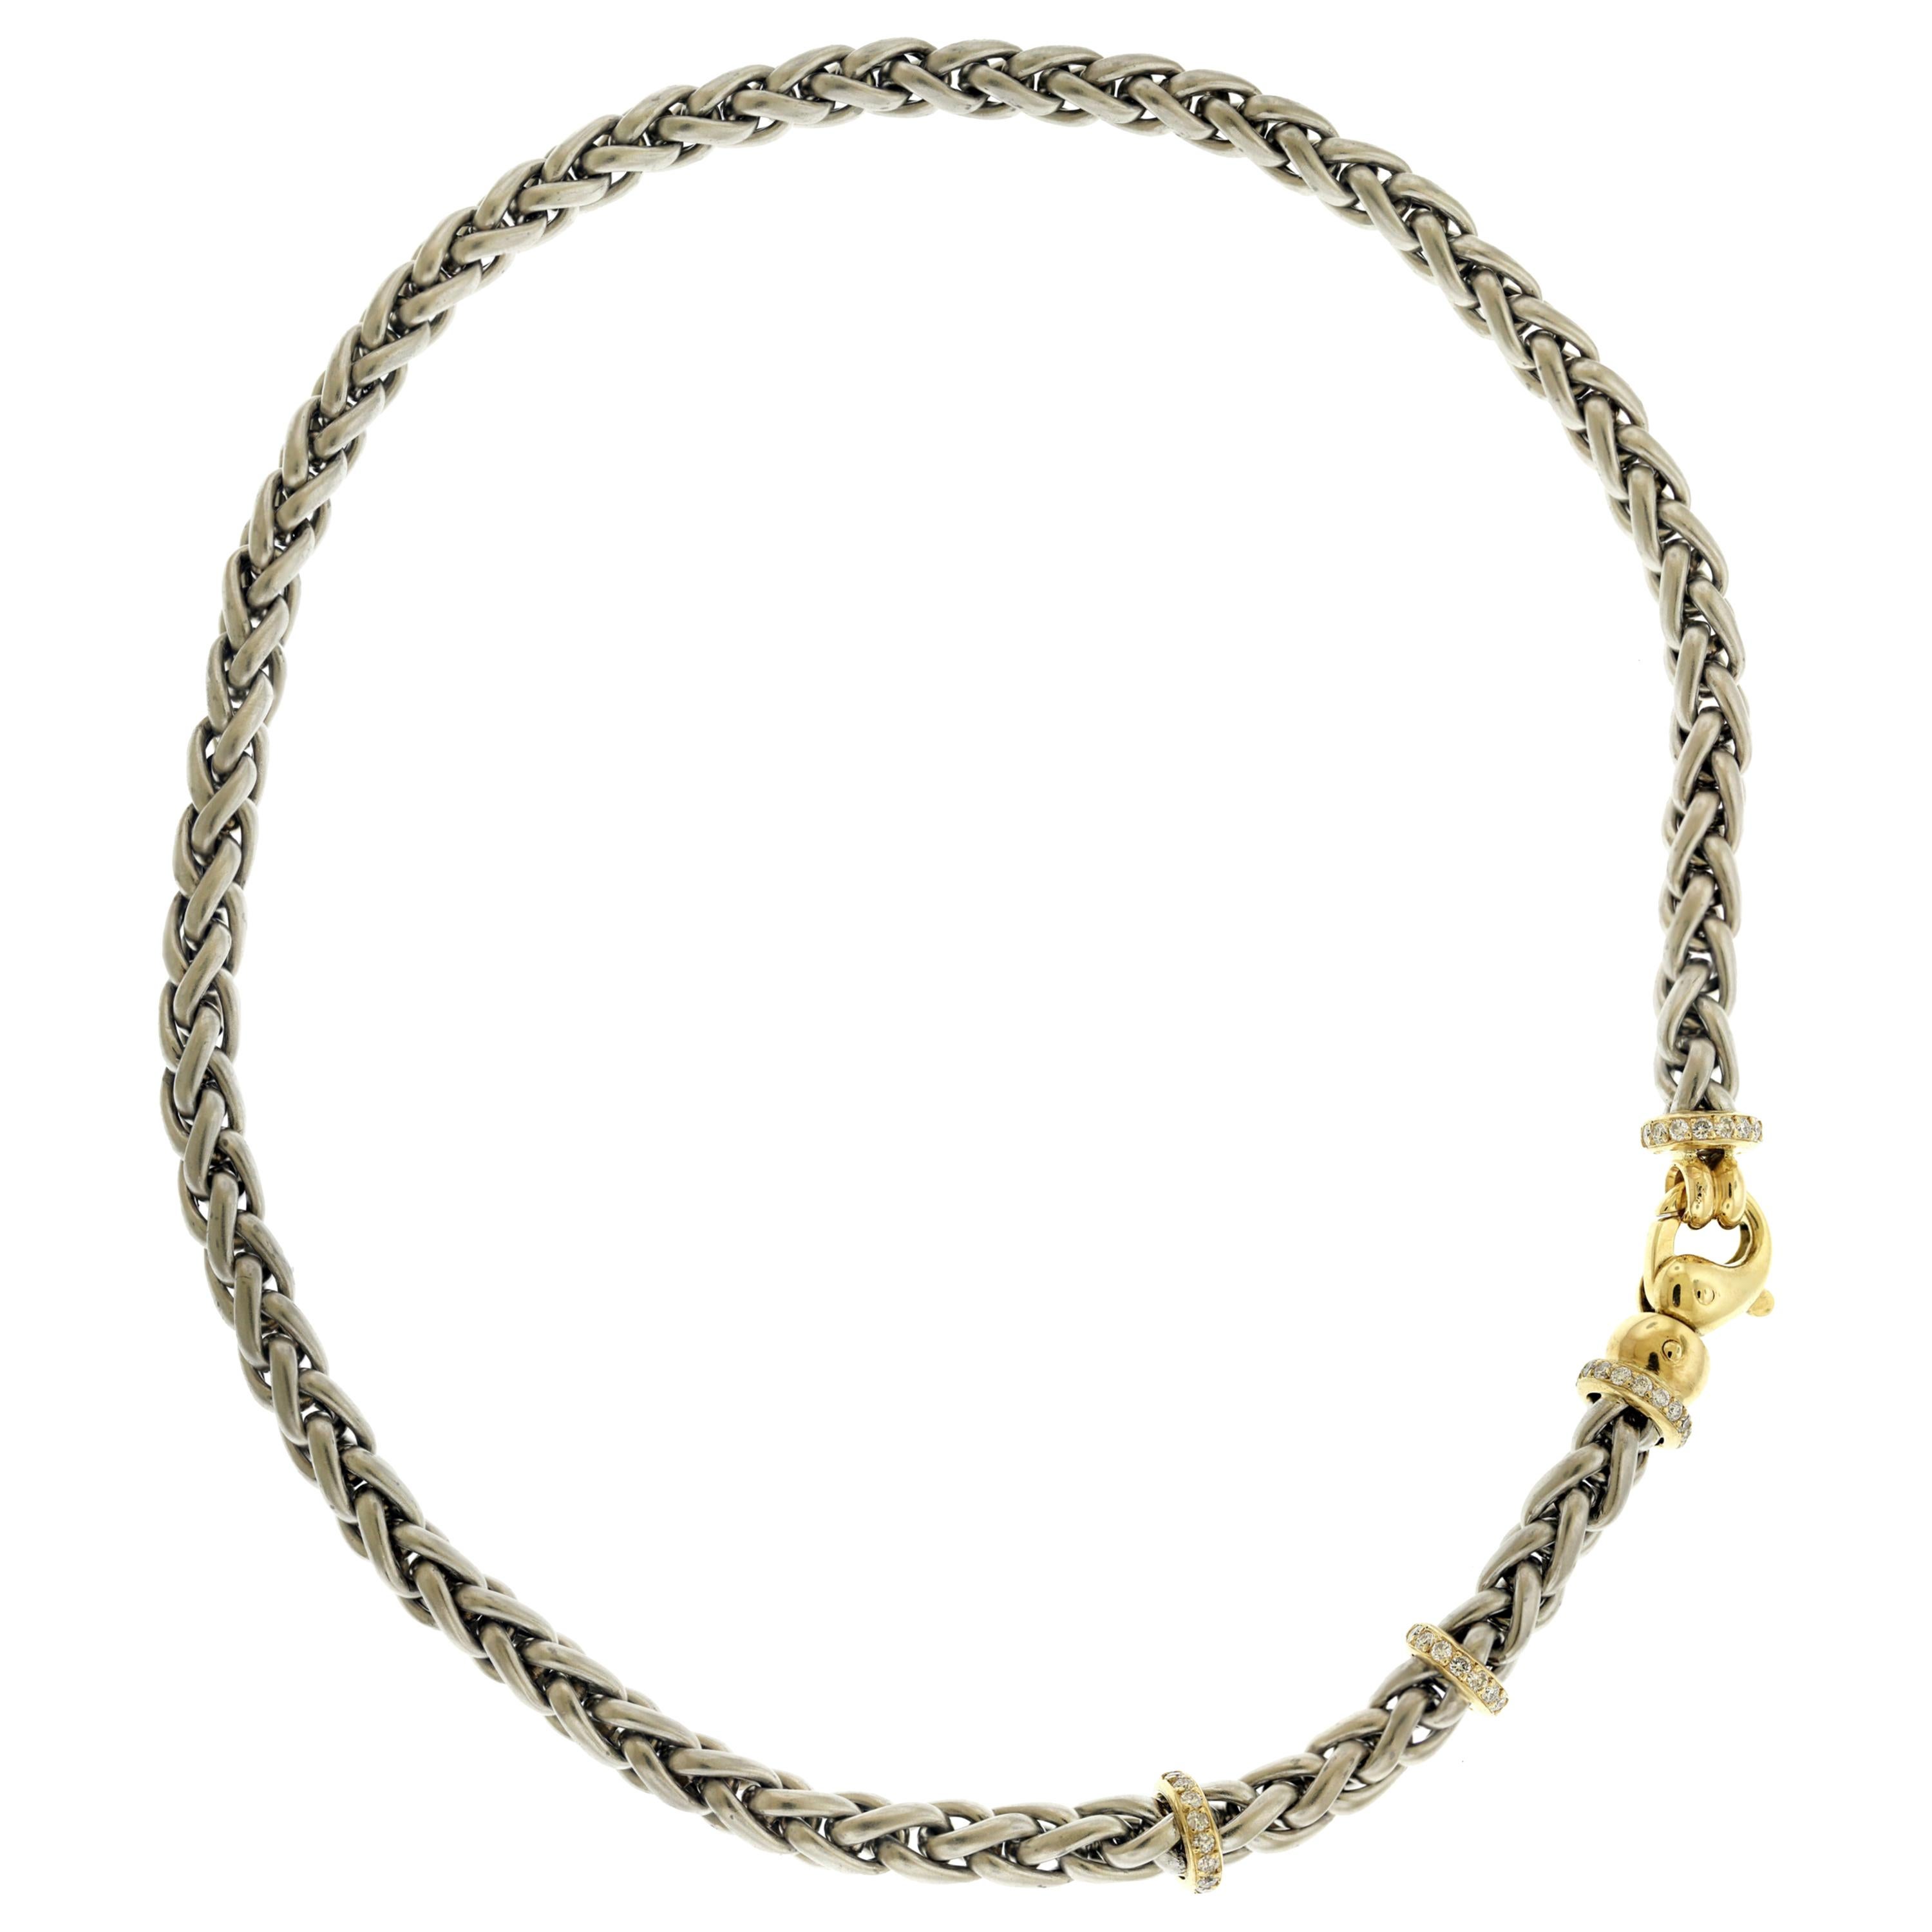 Platinum and 18 Karat Yellow Gold Chain Necklace with Diamond Lobster Clasp